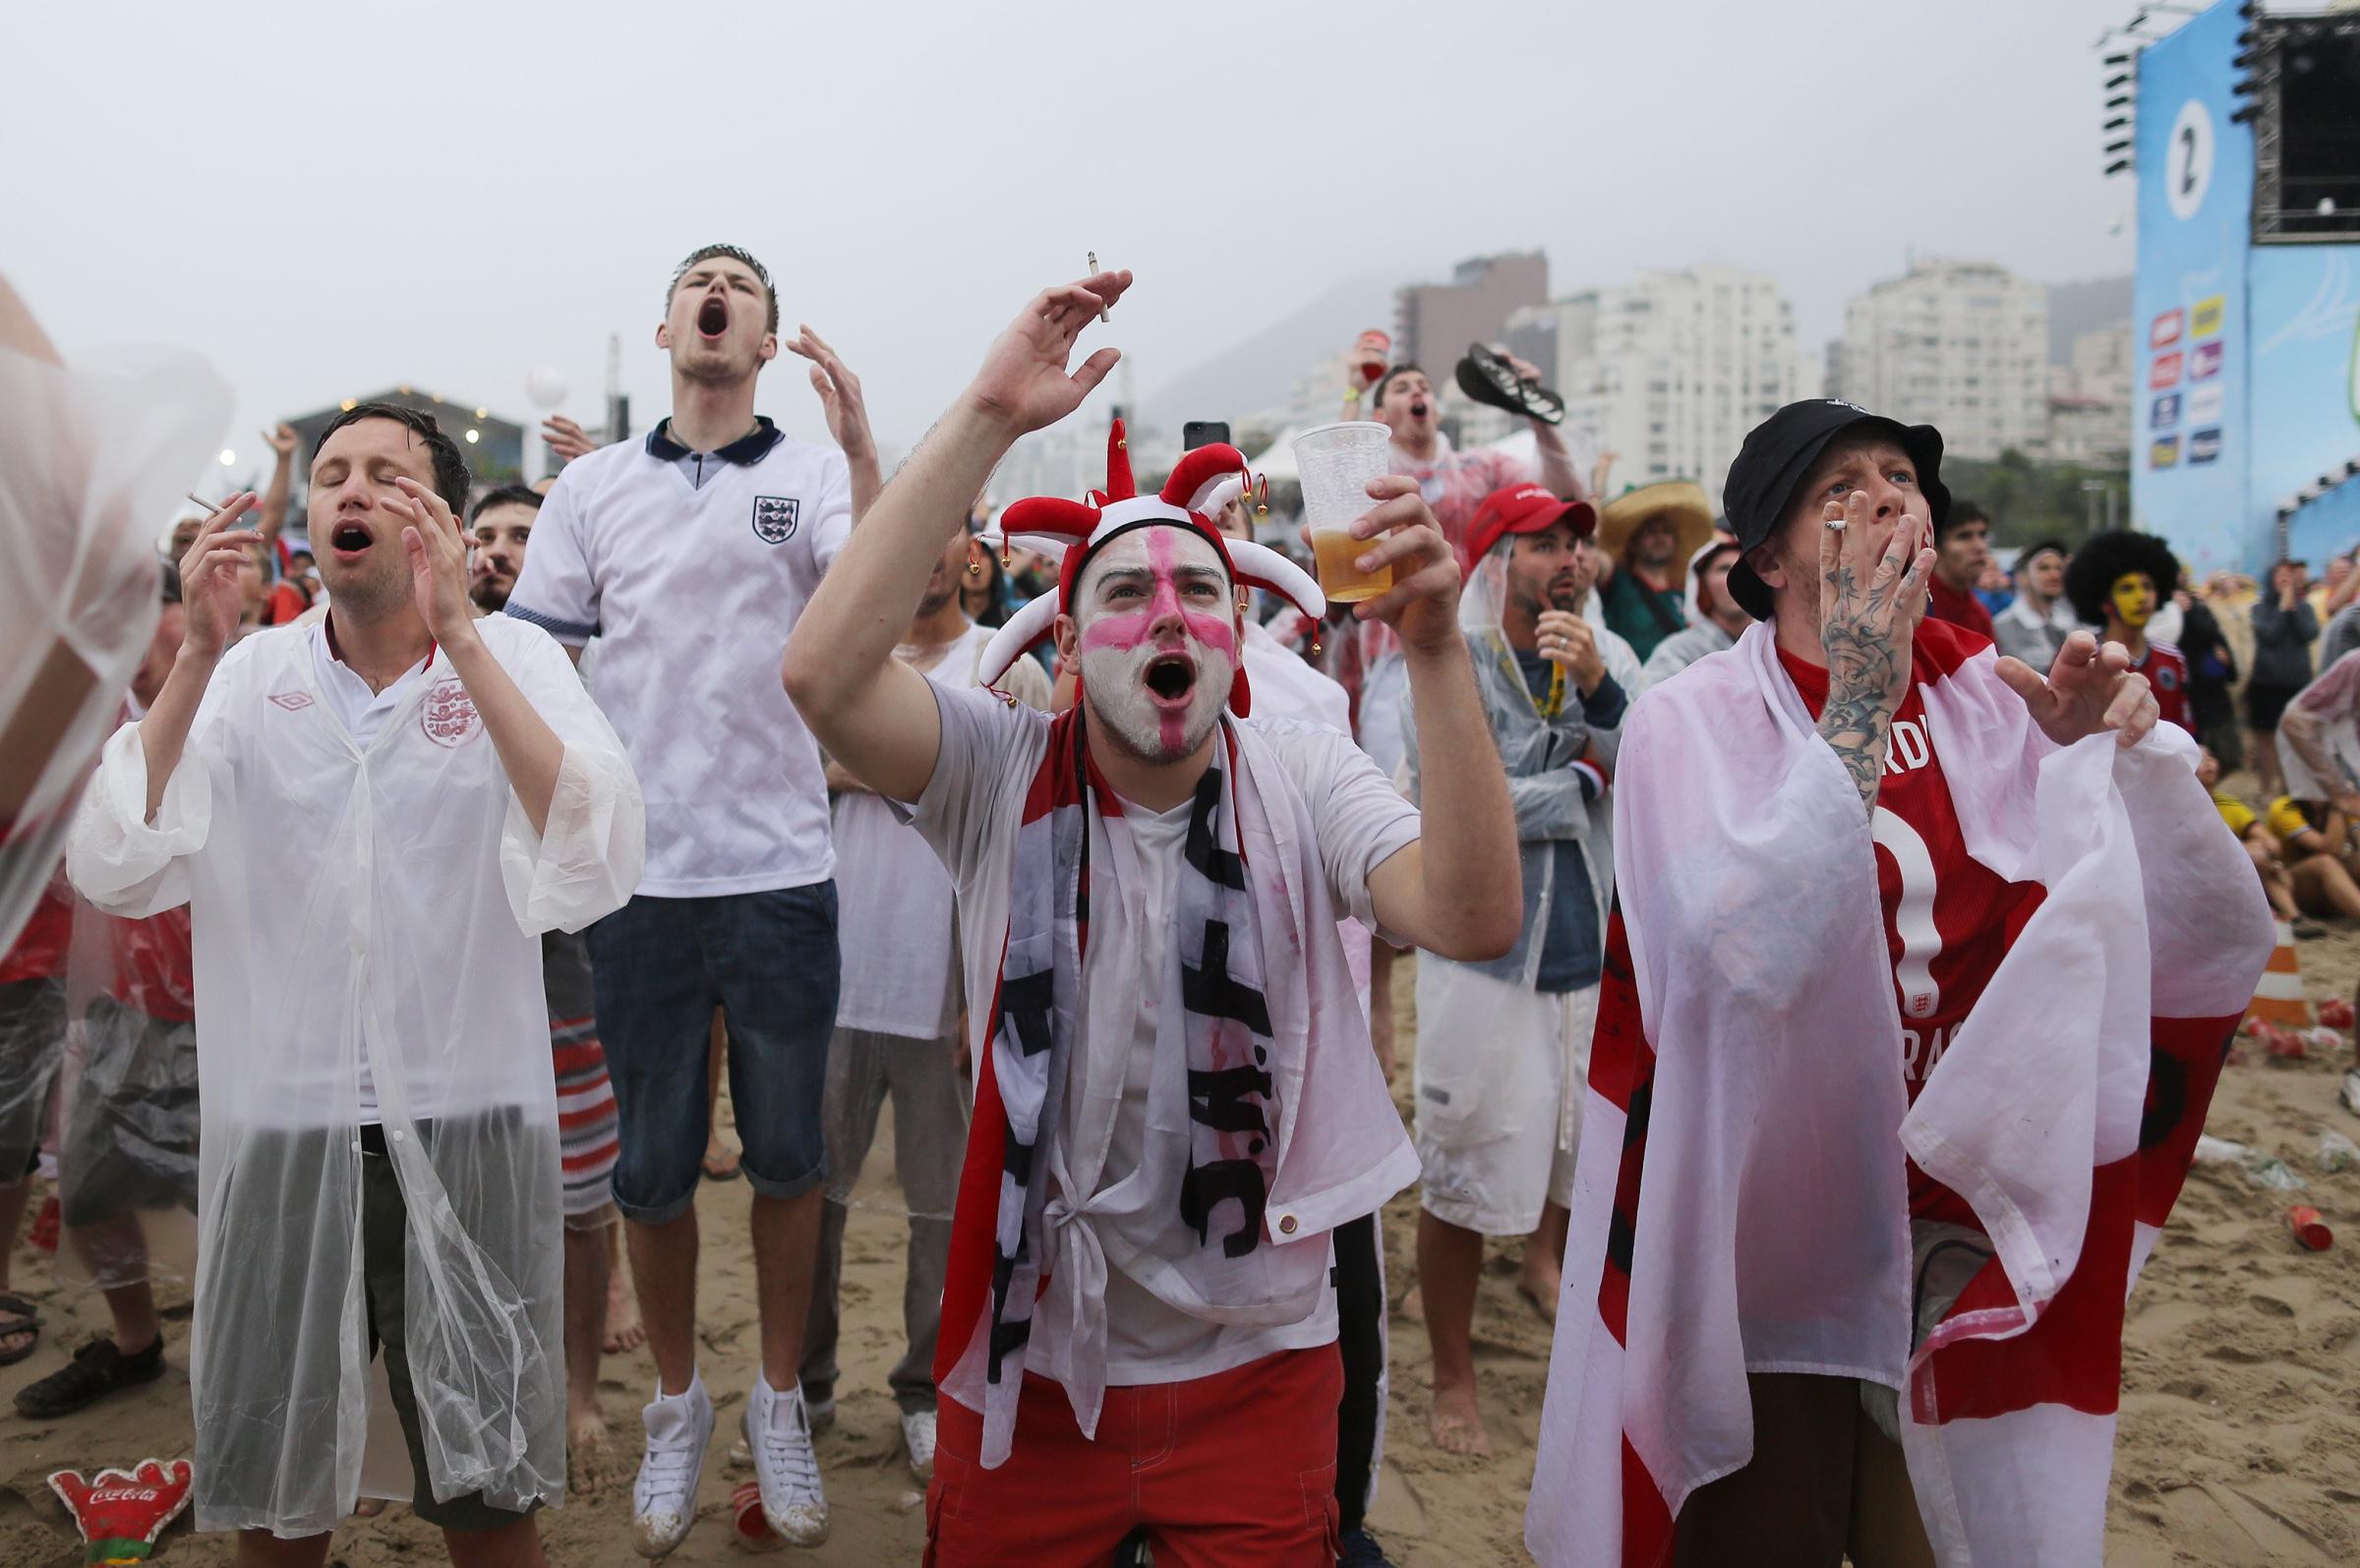 England fans react as they watch a live telecast of the group D World Cup match between Uruguay and England, inside the FIFA Fan Fest area on Copacabana beach, in Rio de Janeiro on June 19, 2014.